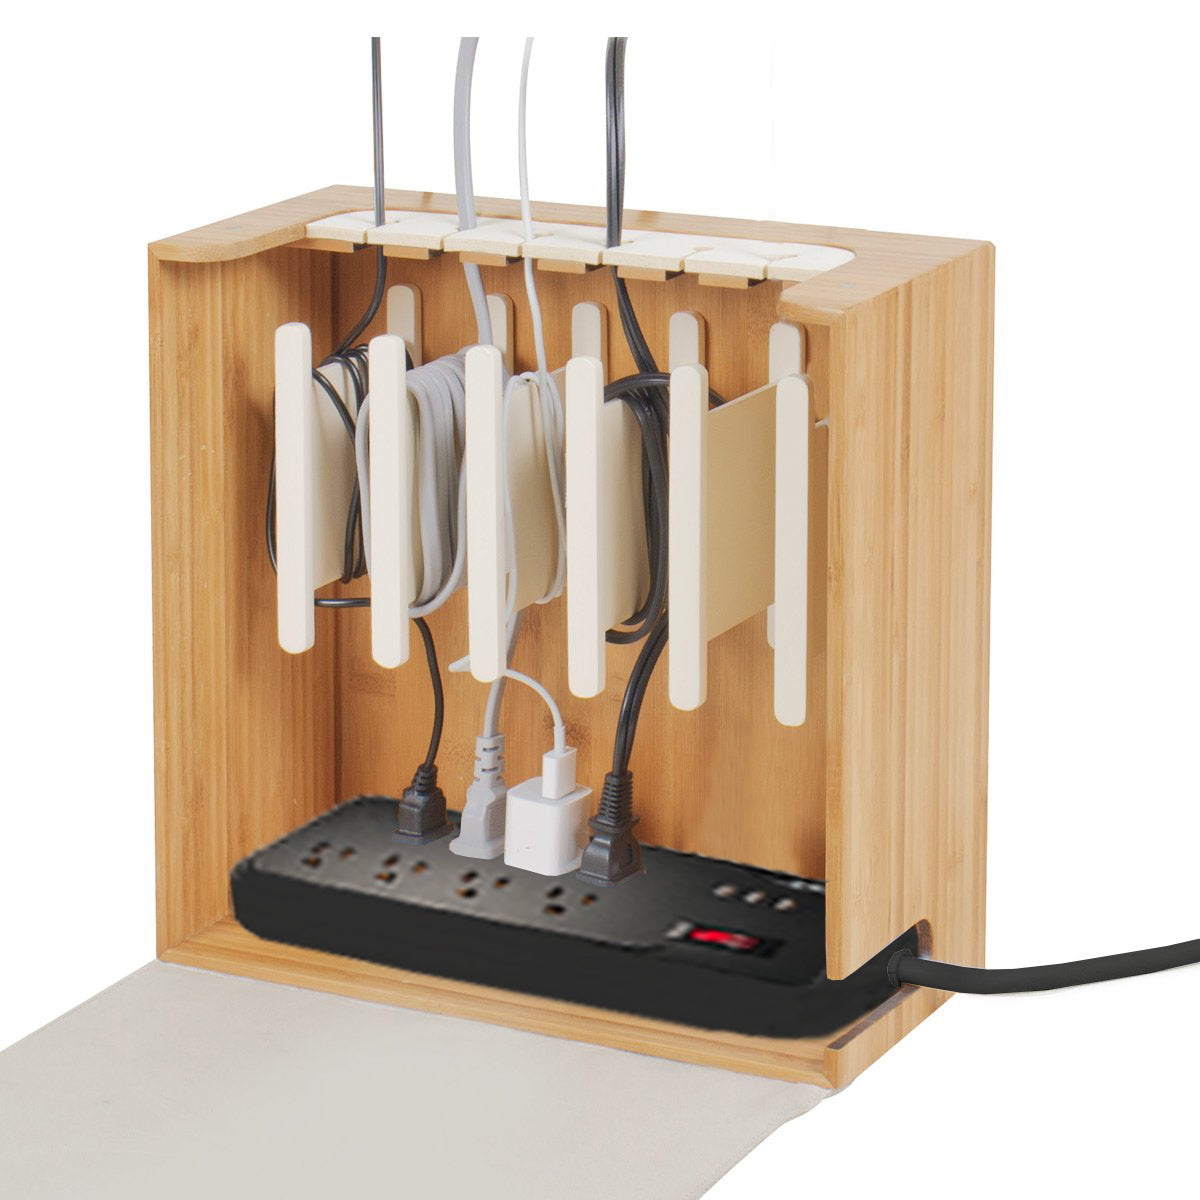 Cord Corral Organizer (with Free AC + USB Power Strip 29.99 Value) - Great Useful Stuff